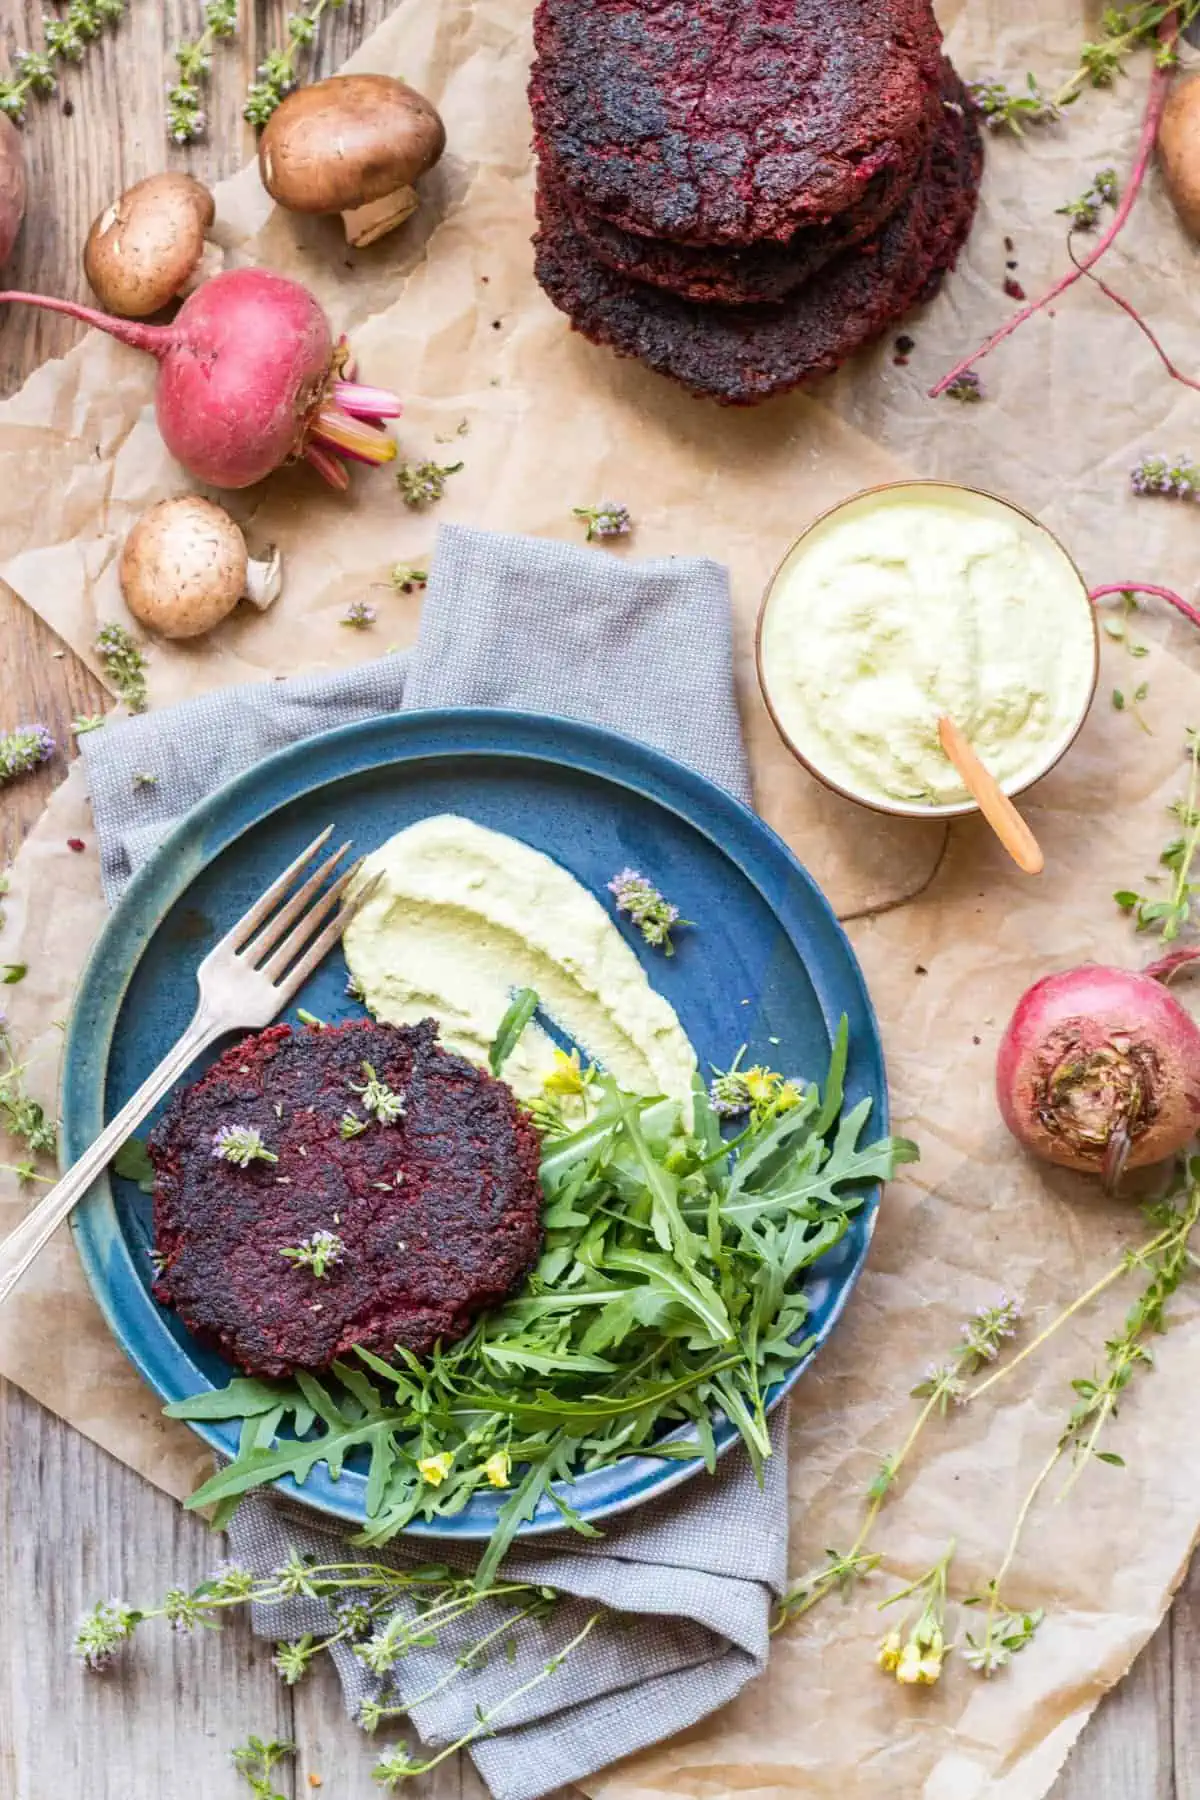 Top view of a blue dinner plate with a lentil beet burger and green salad.